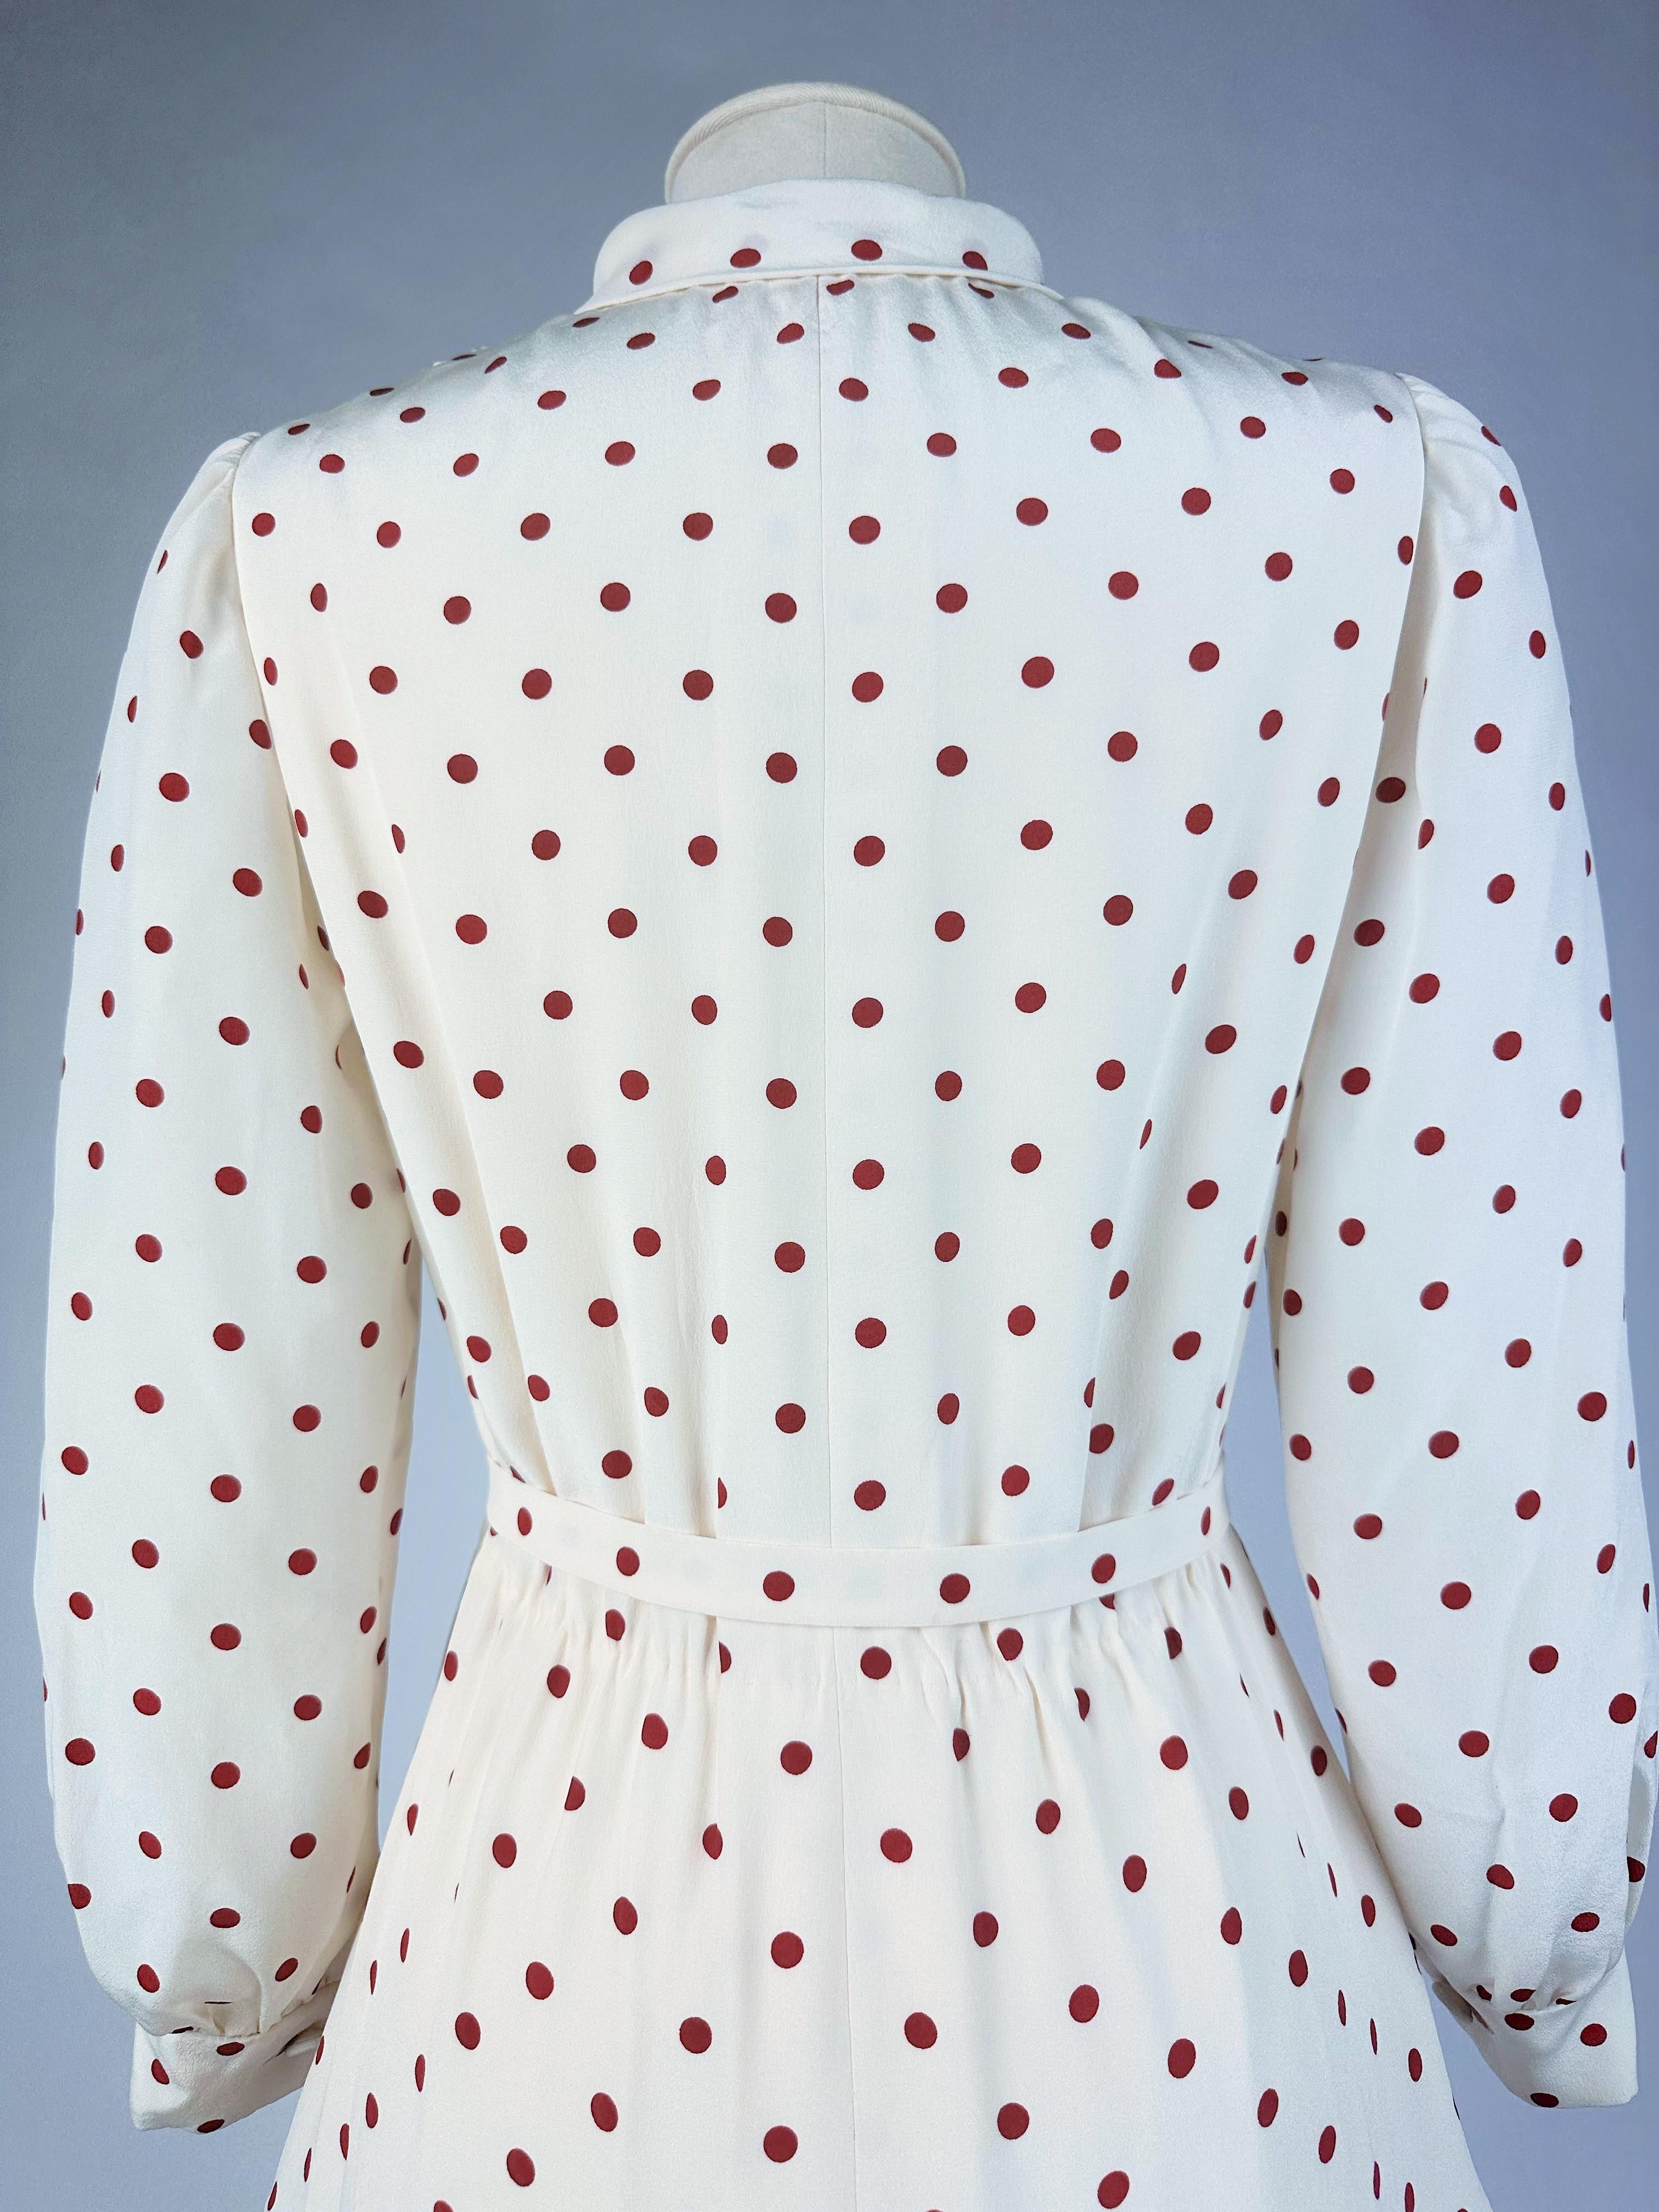 A Polka Dots crepe cocktail dress by Chanel Haute Couture numbered 59644 C. 1975 For Sale 1